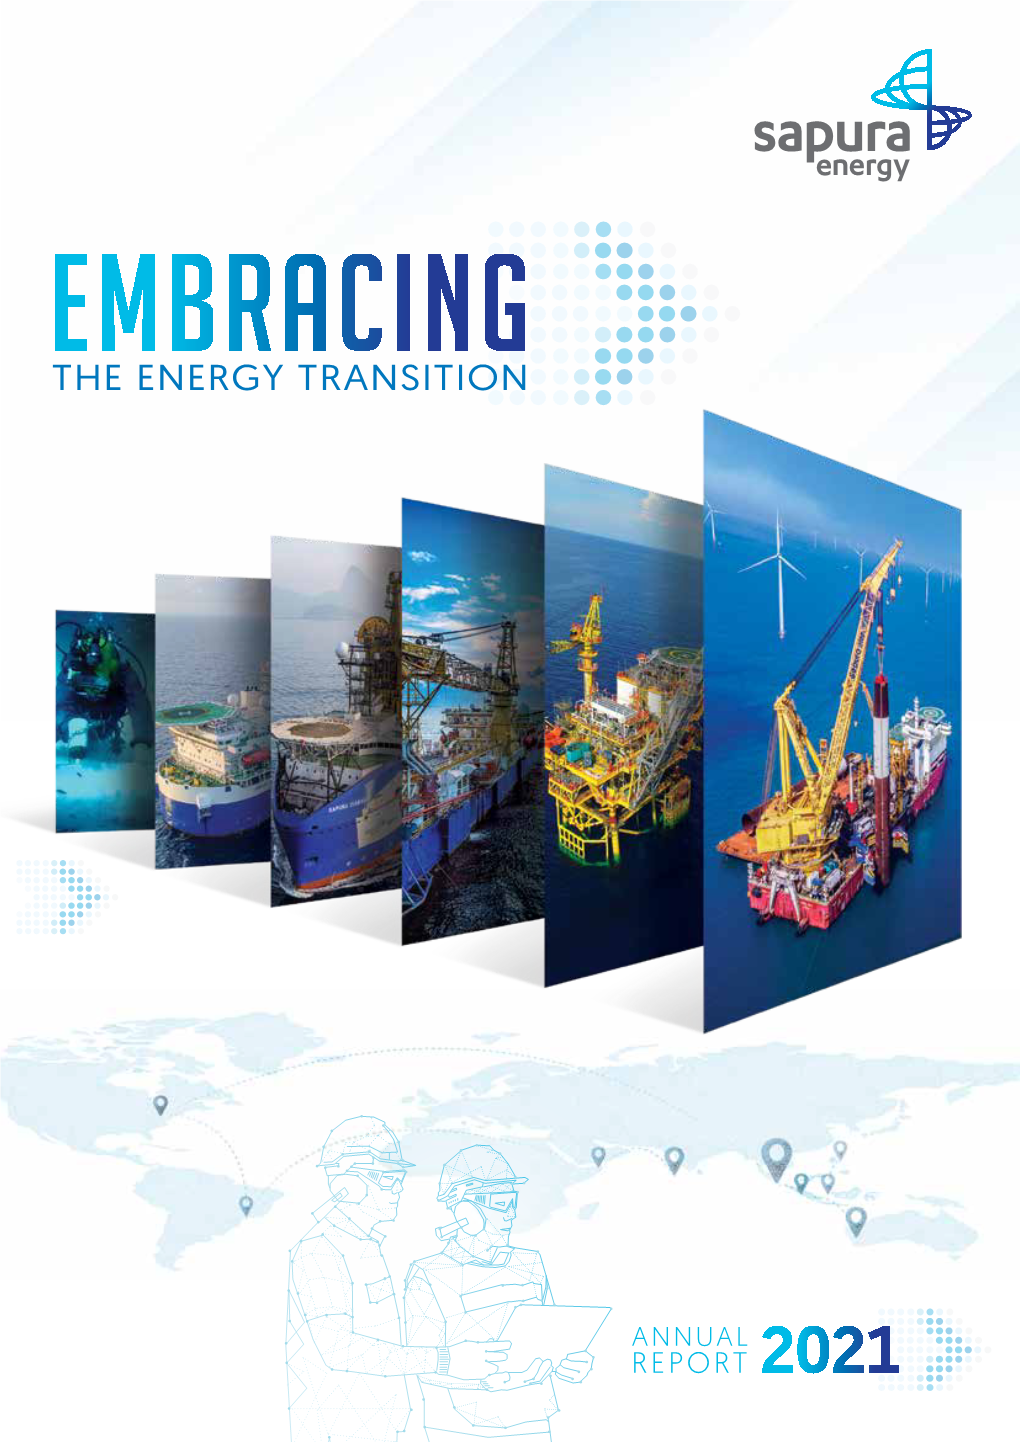 THE ENERGY TRANSITION Thank You for All Your Efforts in 2020! Our People, Thank You Our Greatest Asset